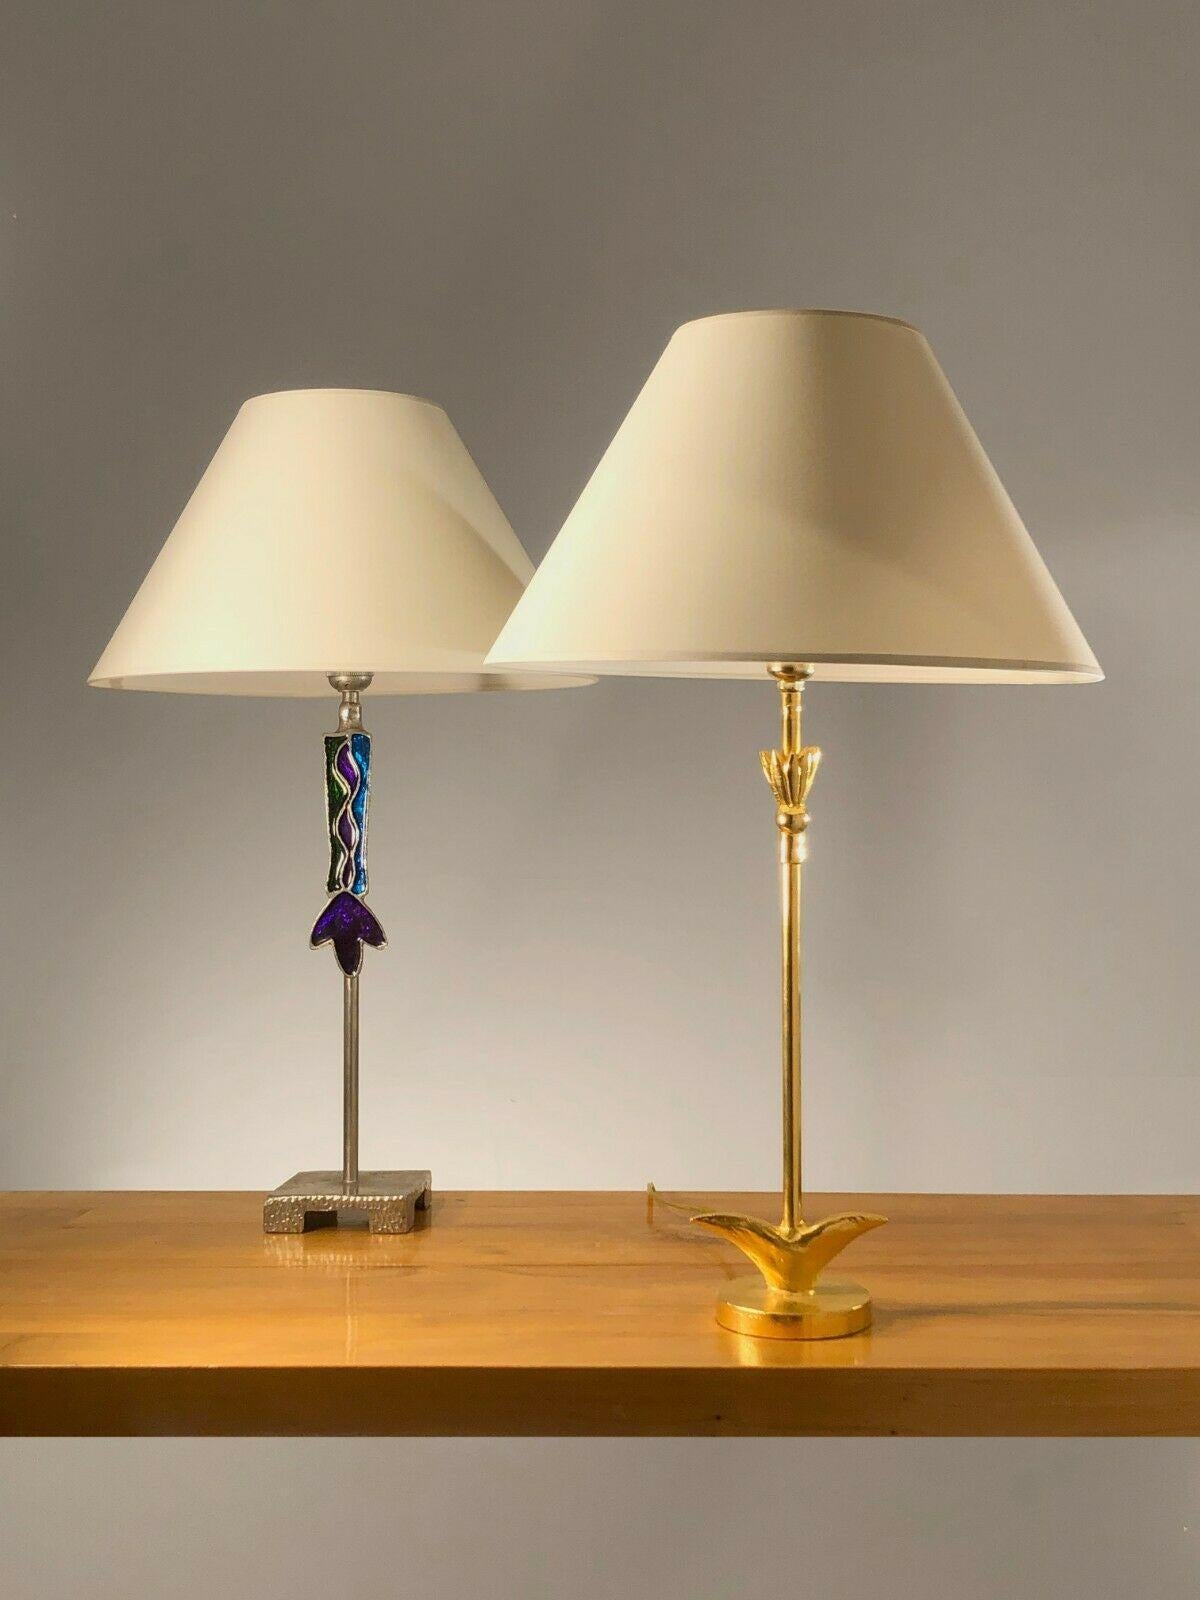 A POST-MODERN Sculptural TABLE LAMP by NICOLAS DEWAEL, ed. FONDICA, France 1990 For Sale 3